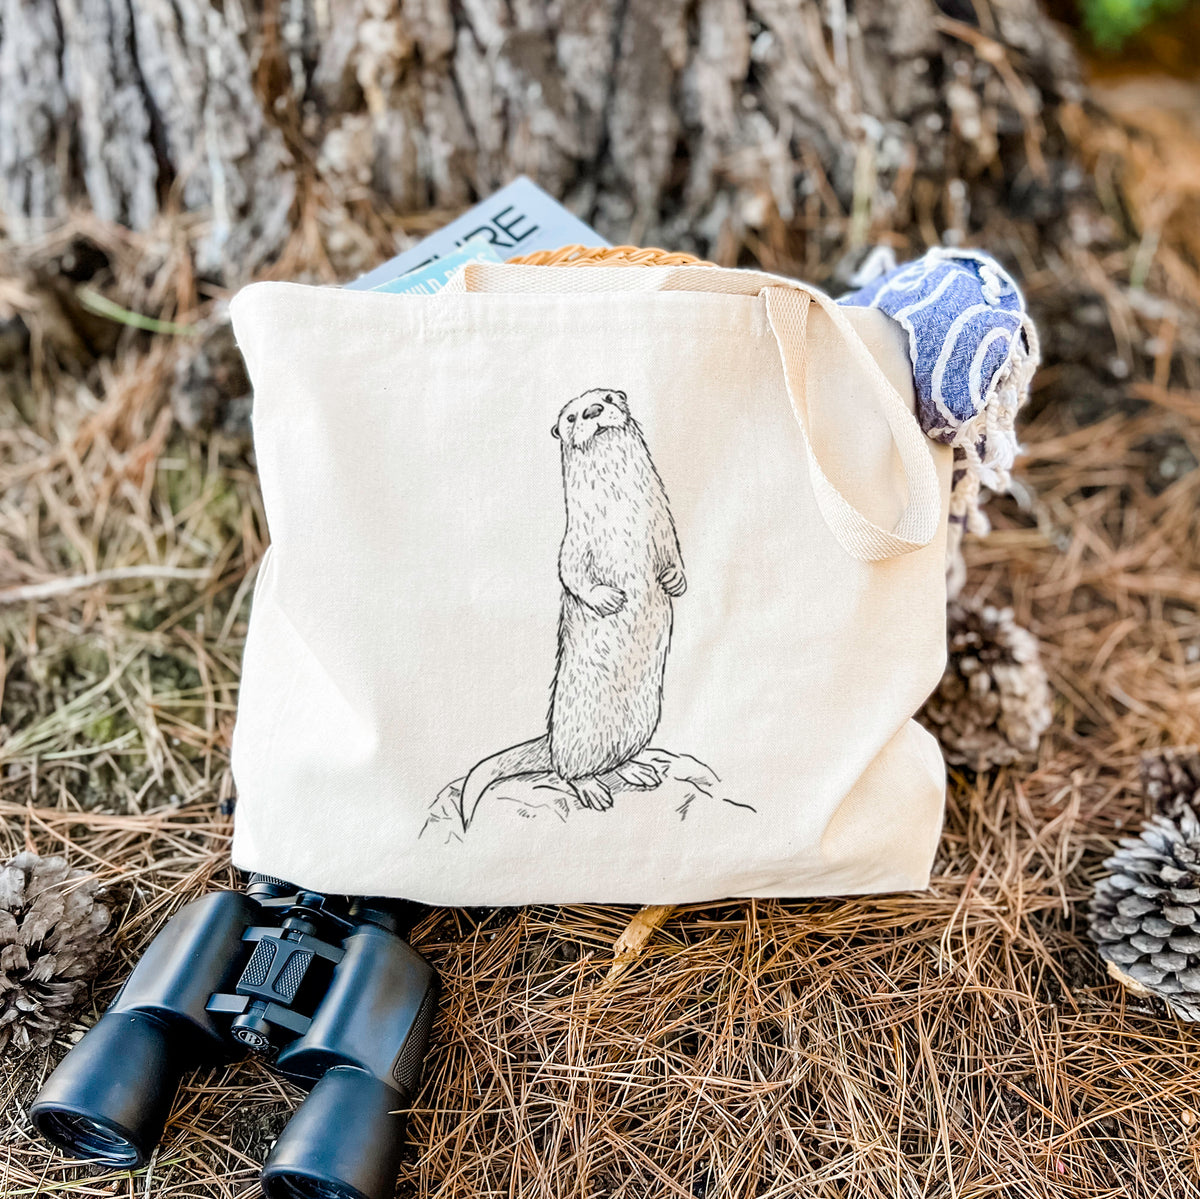 North American River Otter - Lontra canadensis - Tote Bag